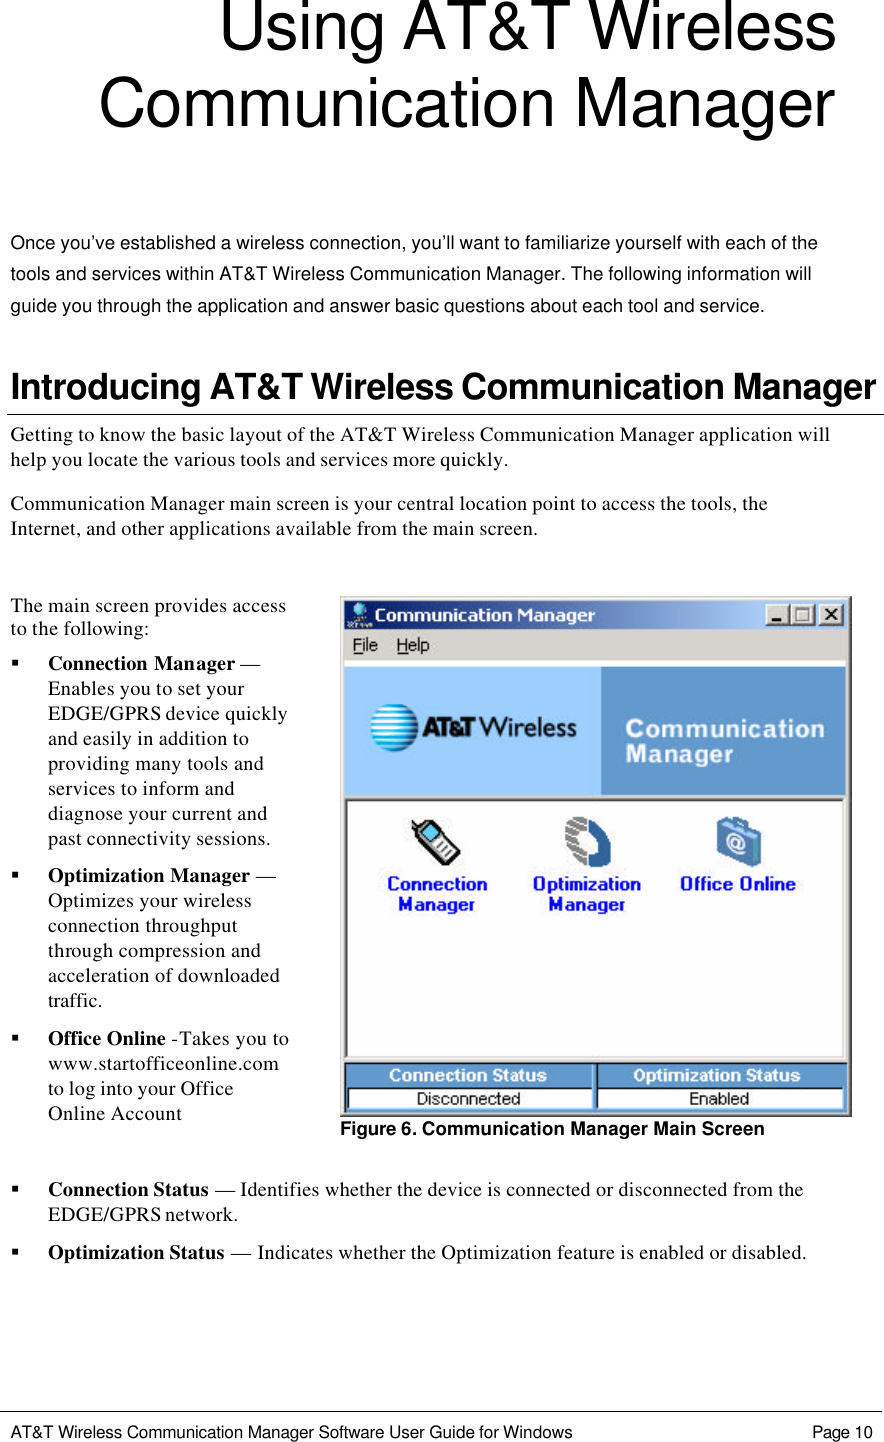   AT&amp;T Wireless Communication Manager Software User Guide for Windows    Page 10  Using AT&amp;T Wireless Communication Manager  Once you’ve established a wireless connection, you’ll want to familiarize yourself with each of the tools and services within AT&amp;T Wireless Communication Manager. The following information will guide you through the application and answer basic questions about each tool and service. Introducing AT&amp;T Wireless Communication Manager Getting to know the basic layout of the AT&amp;T Wireless Communication Manager application will help you locate the various tools and services more quickly. Communication Manager main screen is your central location point to access the tools, the Internet, and other applications available from the main screen.   The main screen provides access to the following: § Connection Manager — Enables you to set your EDGE/GPRS device quickly and easily in addition to providing many tools and services to inform and diagnose your current and past connectivity sessions. § Optimization Manager — Optimizes your wireless connection throughput through compression and acceleration of downloaded traffic.  § Office Online -Takes you to www.startofficeonline.com to log into your Office Online Account   Figure 6. Communication Manager Main Screen  § Connection Status — Identifies whether the device is connected or disconnected from the EDGE/GPRS network. § Optimization Status — Indicates whether the Optimization feature is enabled or disabled. 